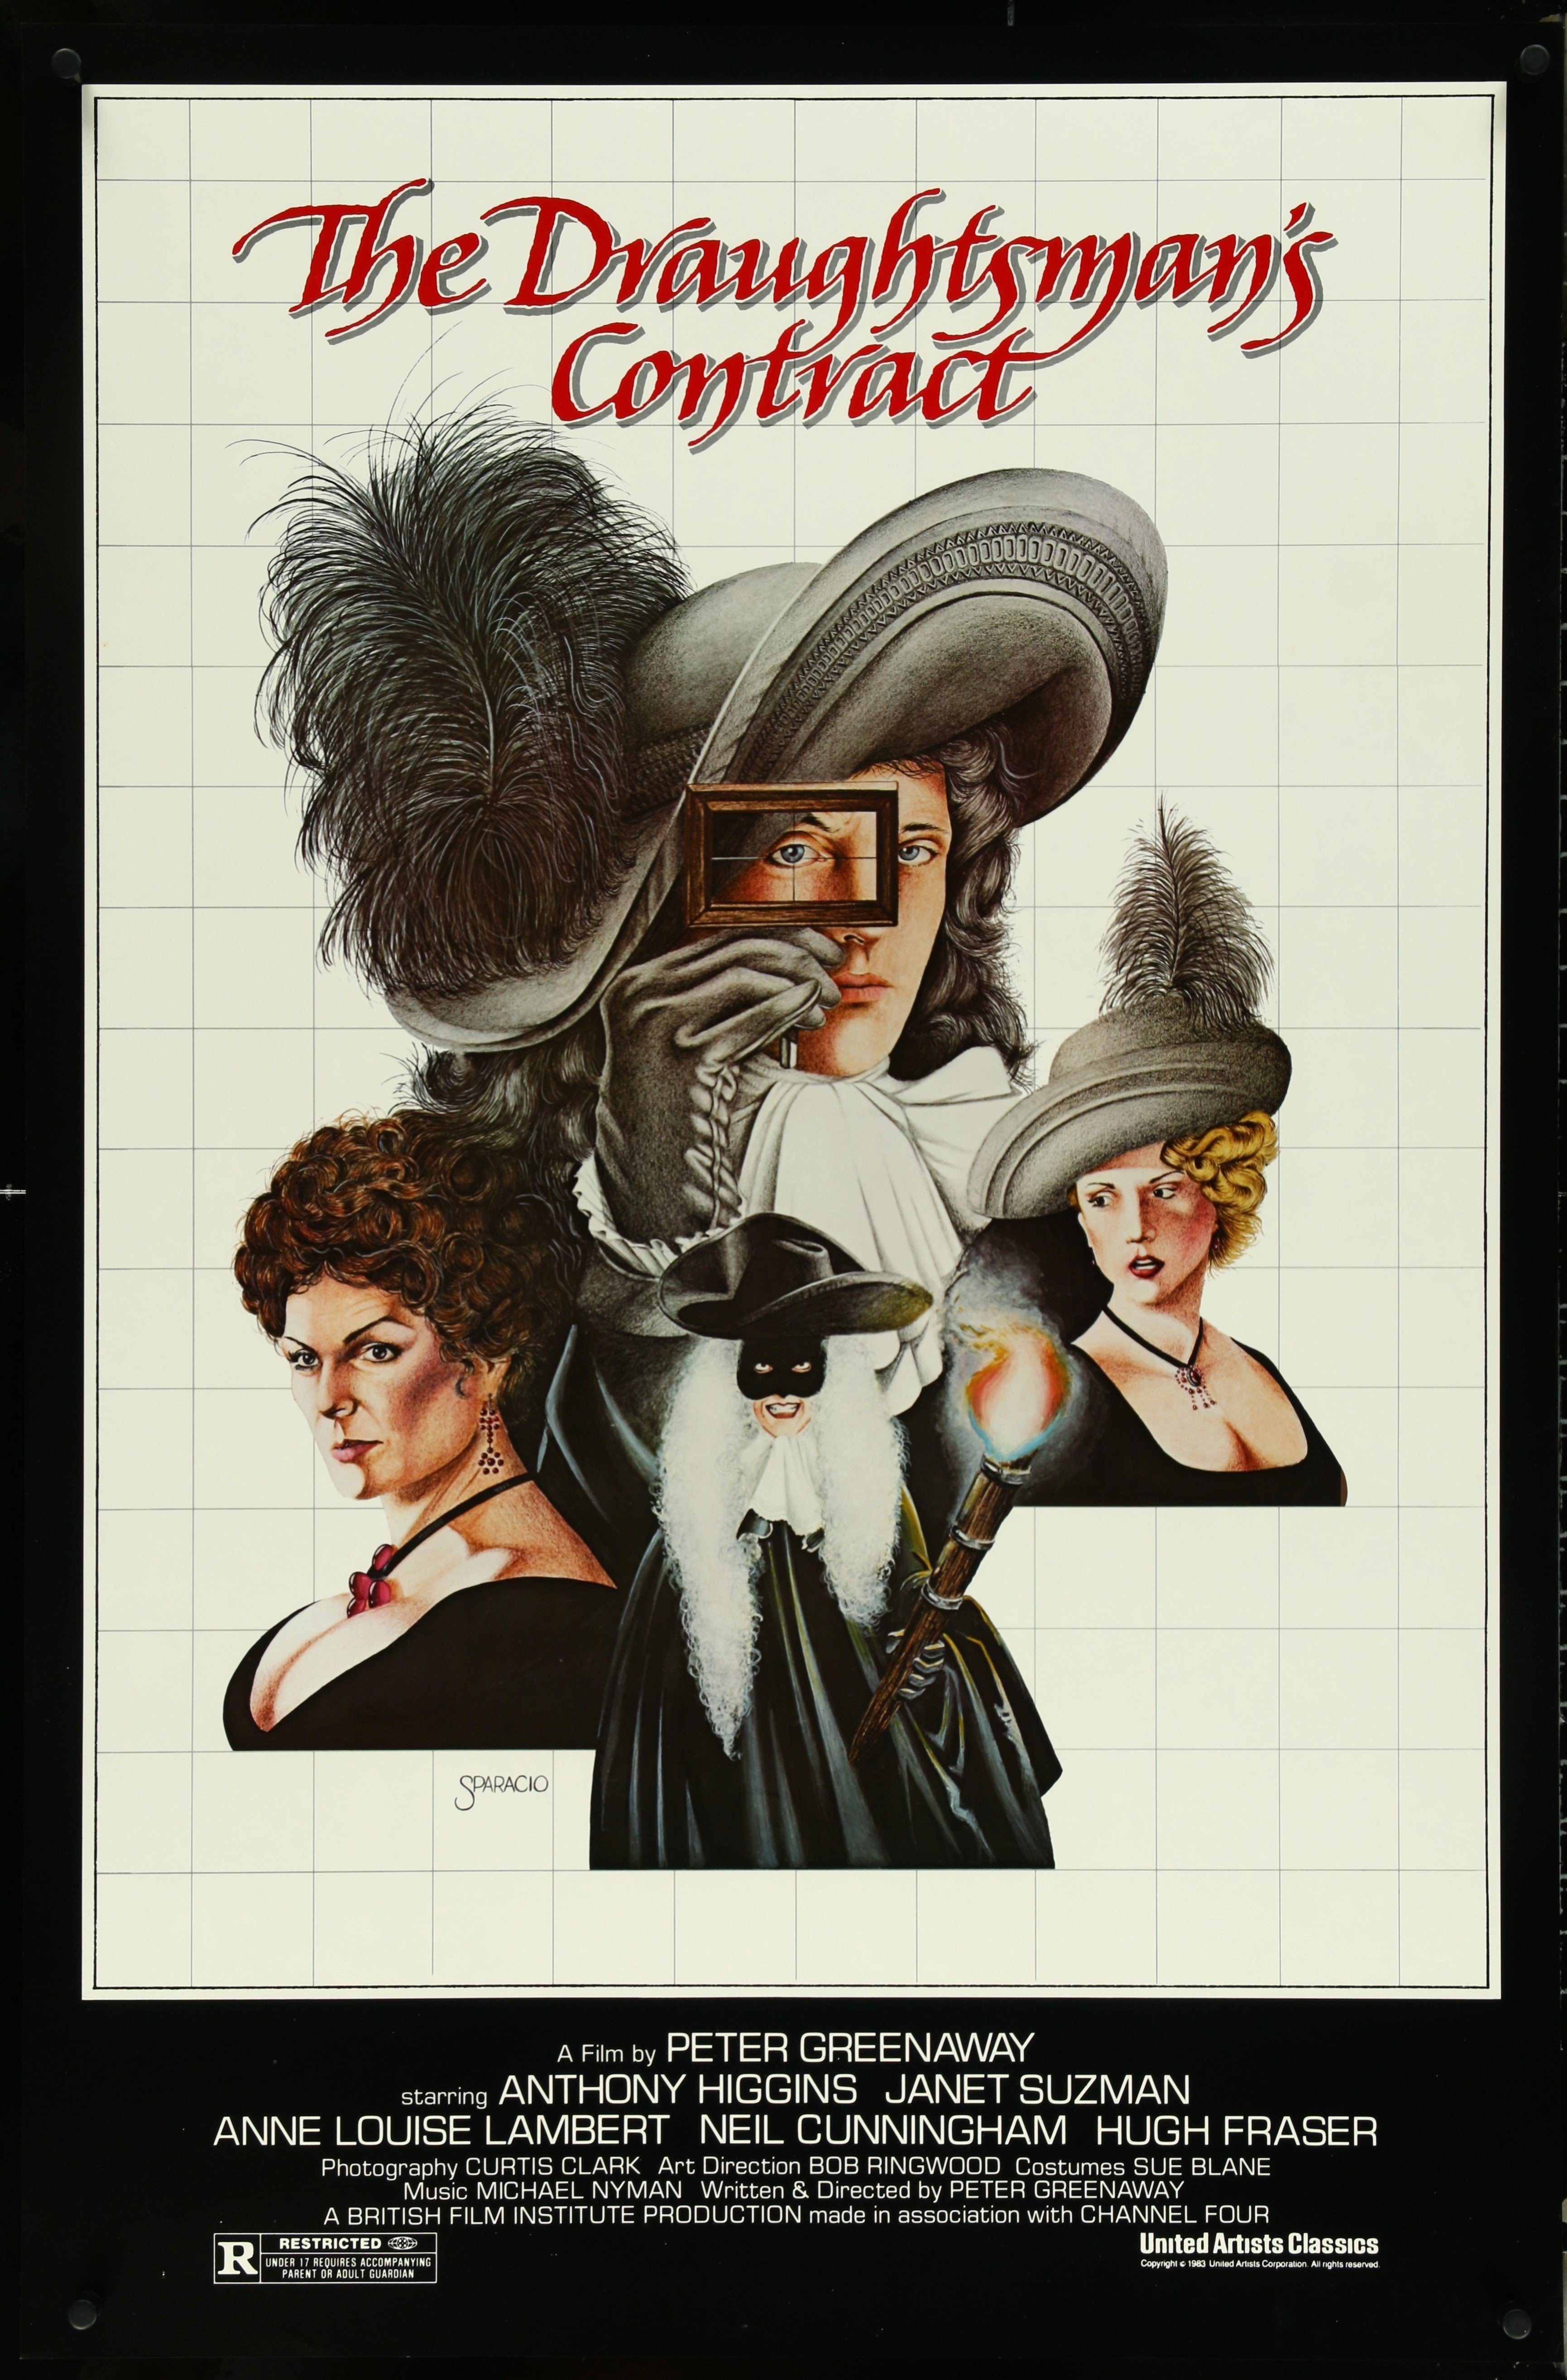 THE DRAUGHTSMAN’S CONTRACT (1983)